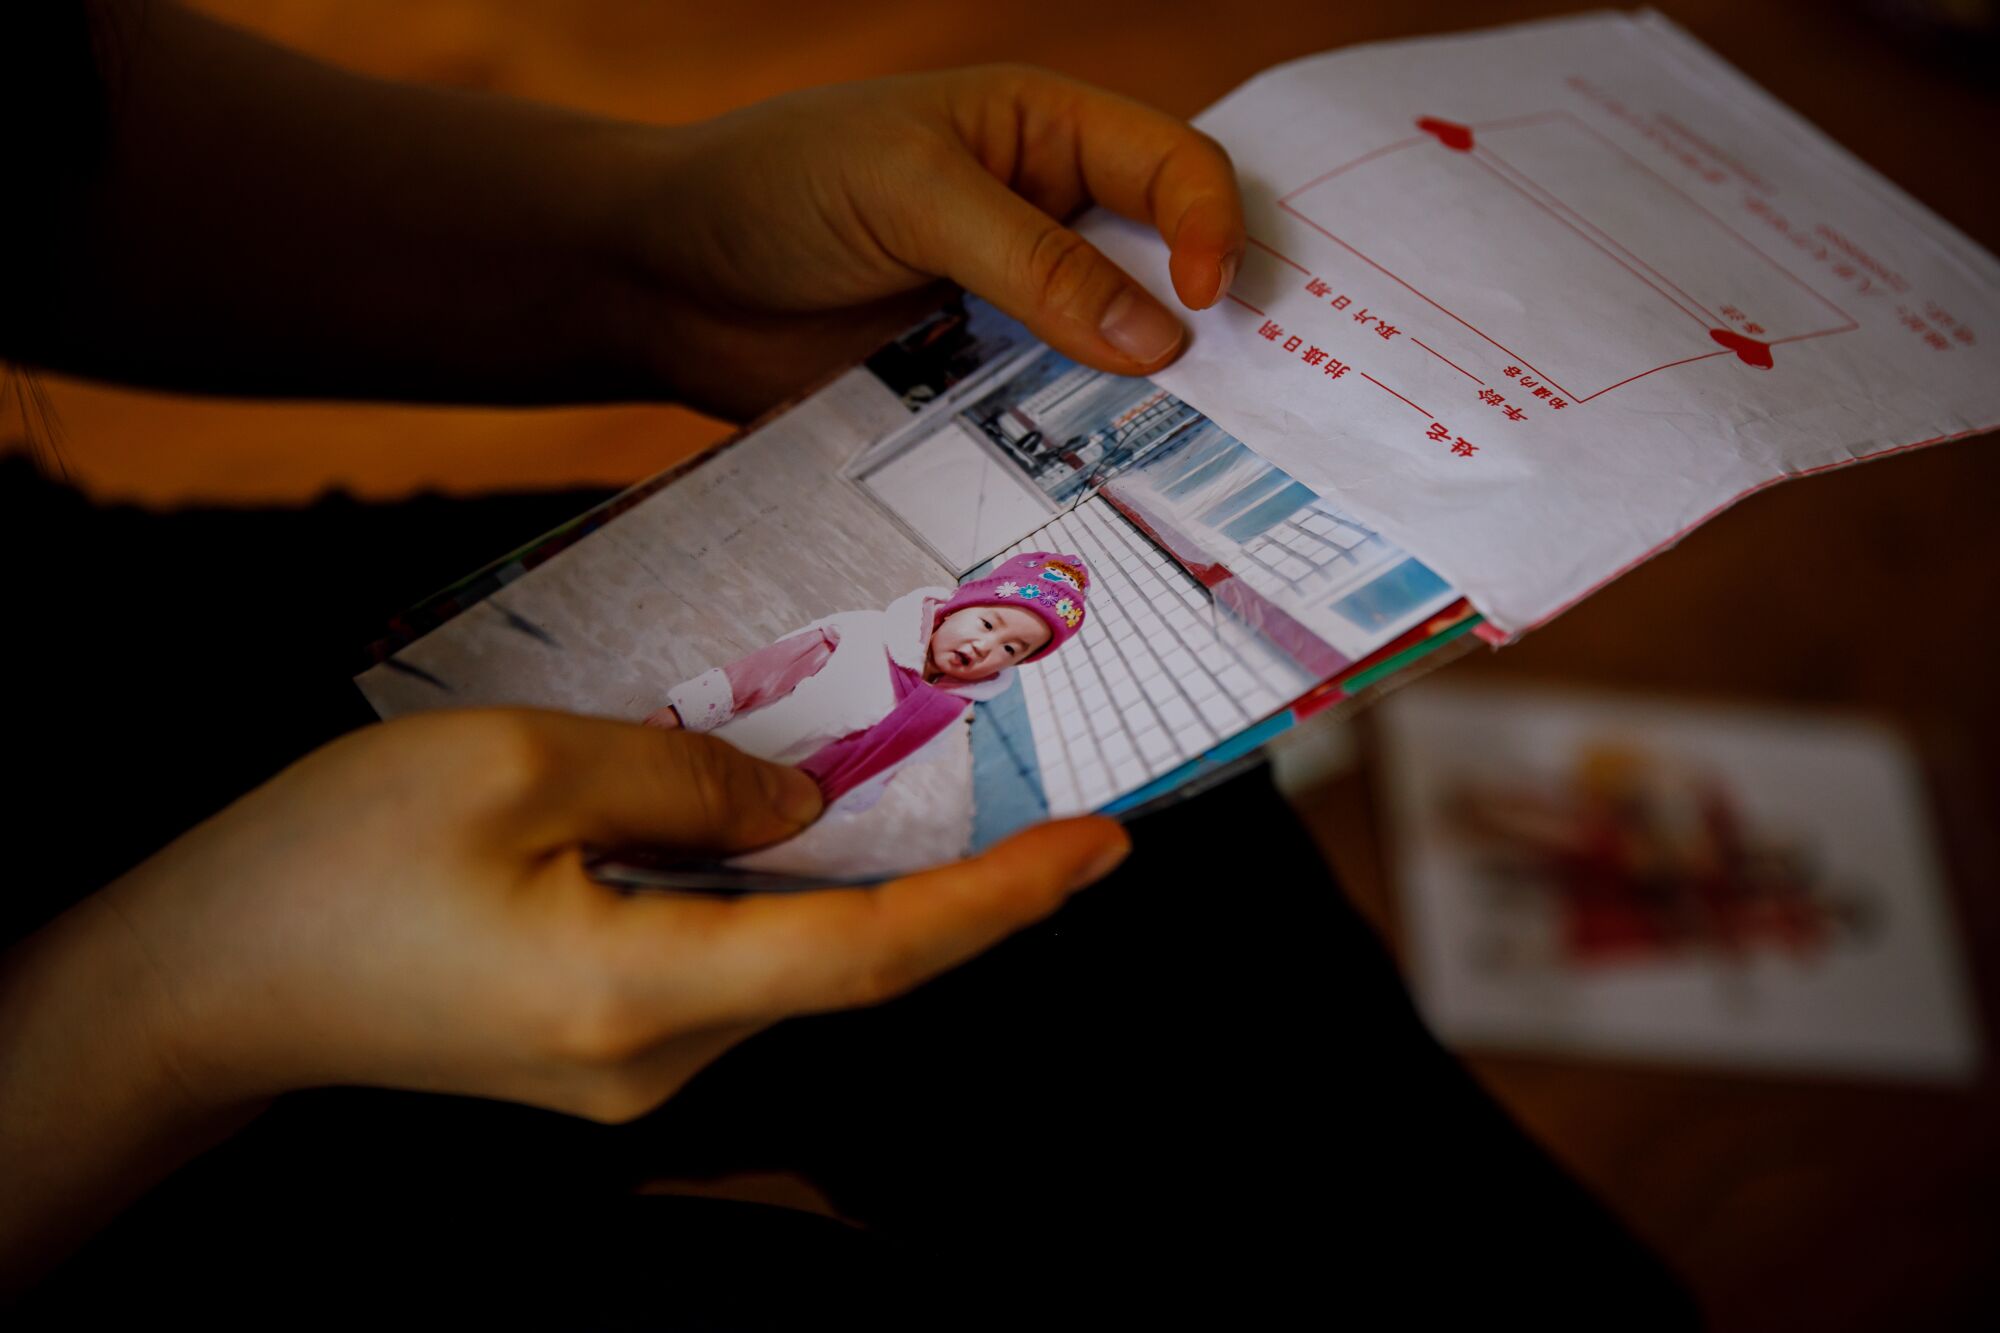 Joy Kim, 30, looks at a photo of the daughter she left behind in China when she escaped to make her way to South Korea.